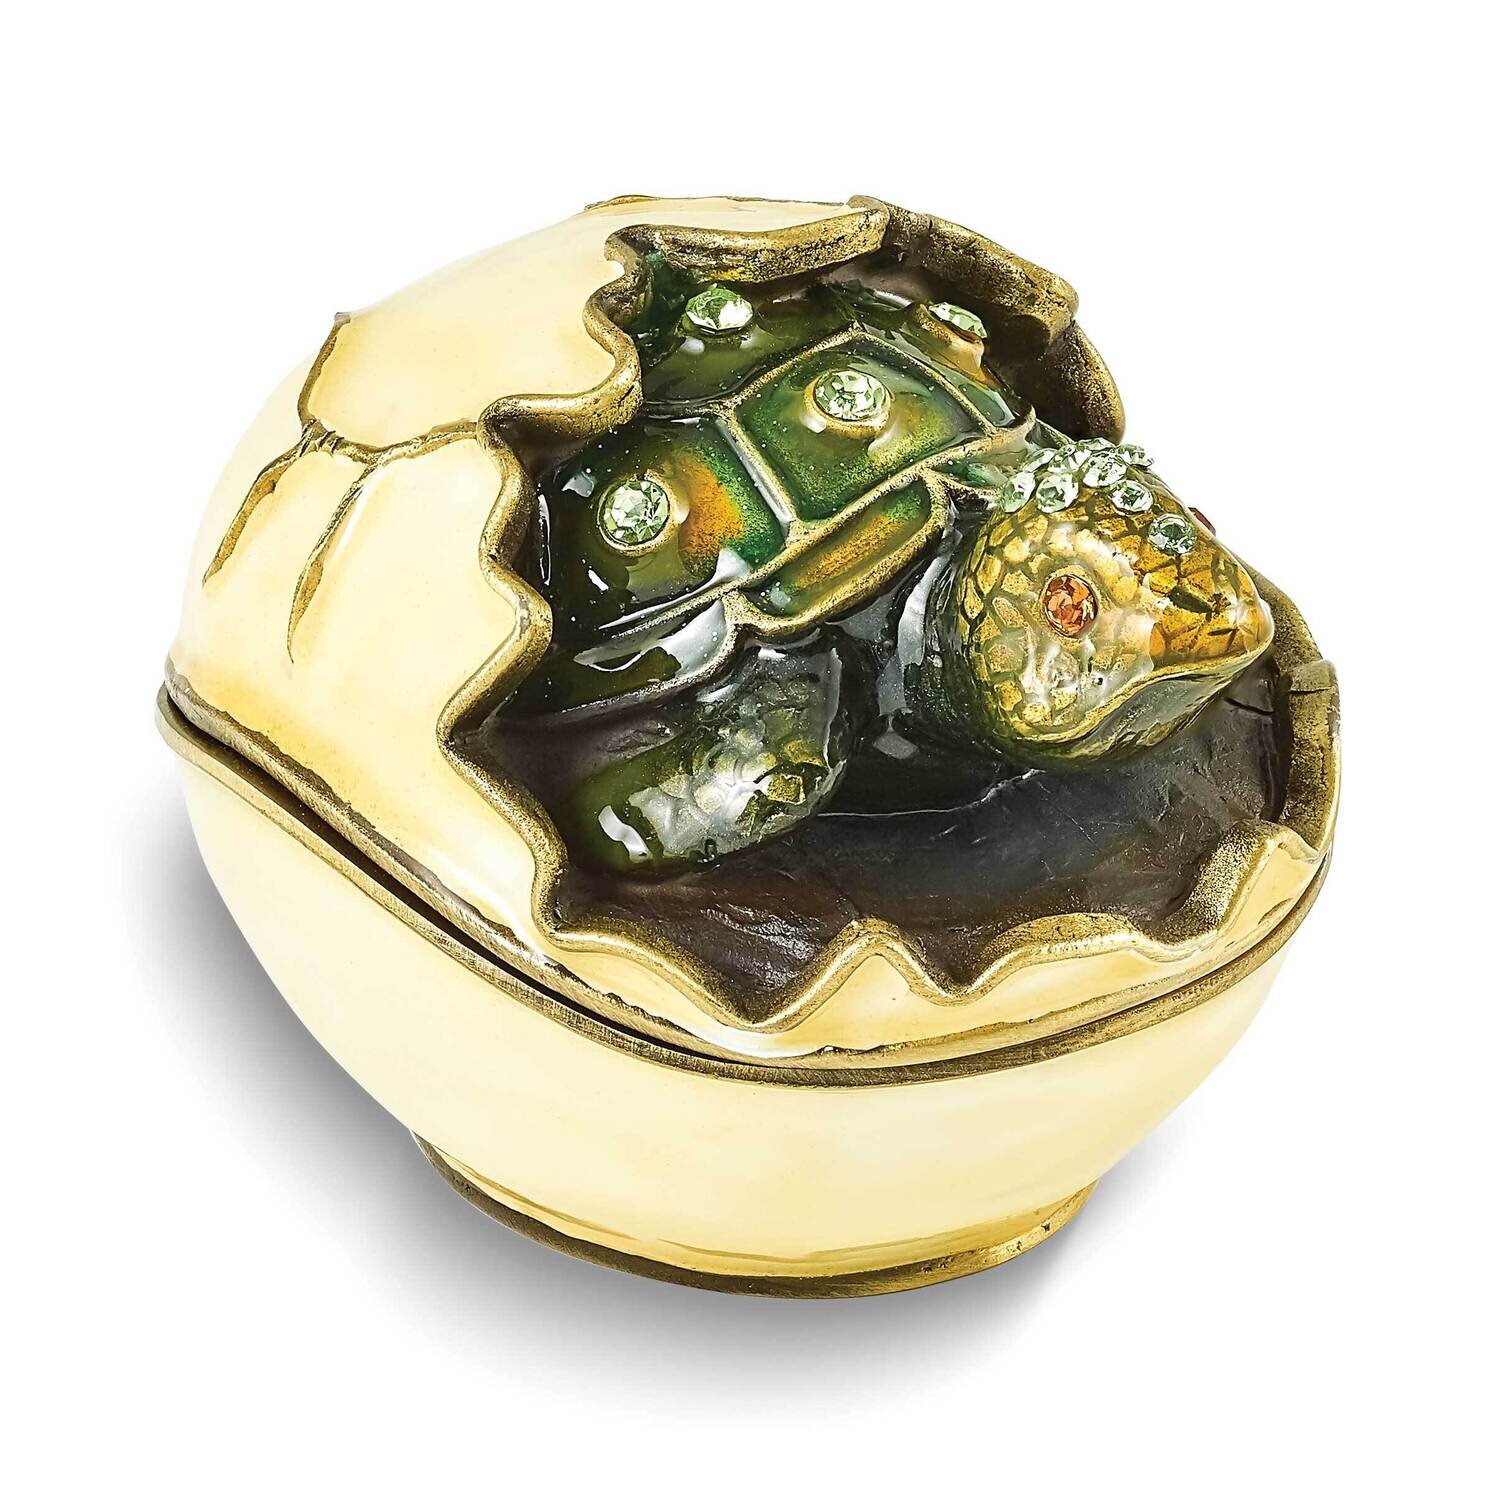 By Jere NORBERT Turtle Hatchling Trinket Box with Matching 18 Inch Necklace Pewter Bejeweled Crystals Gold-tone Enameled BJ4154